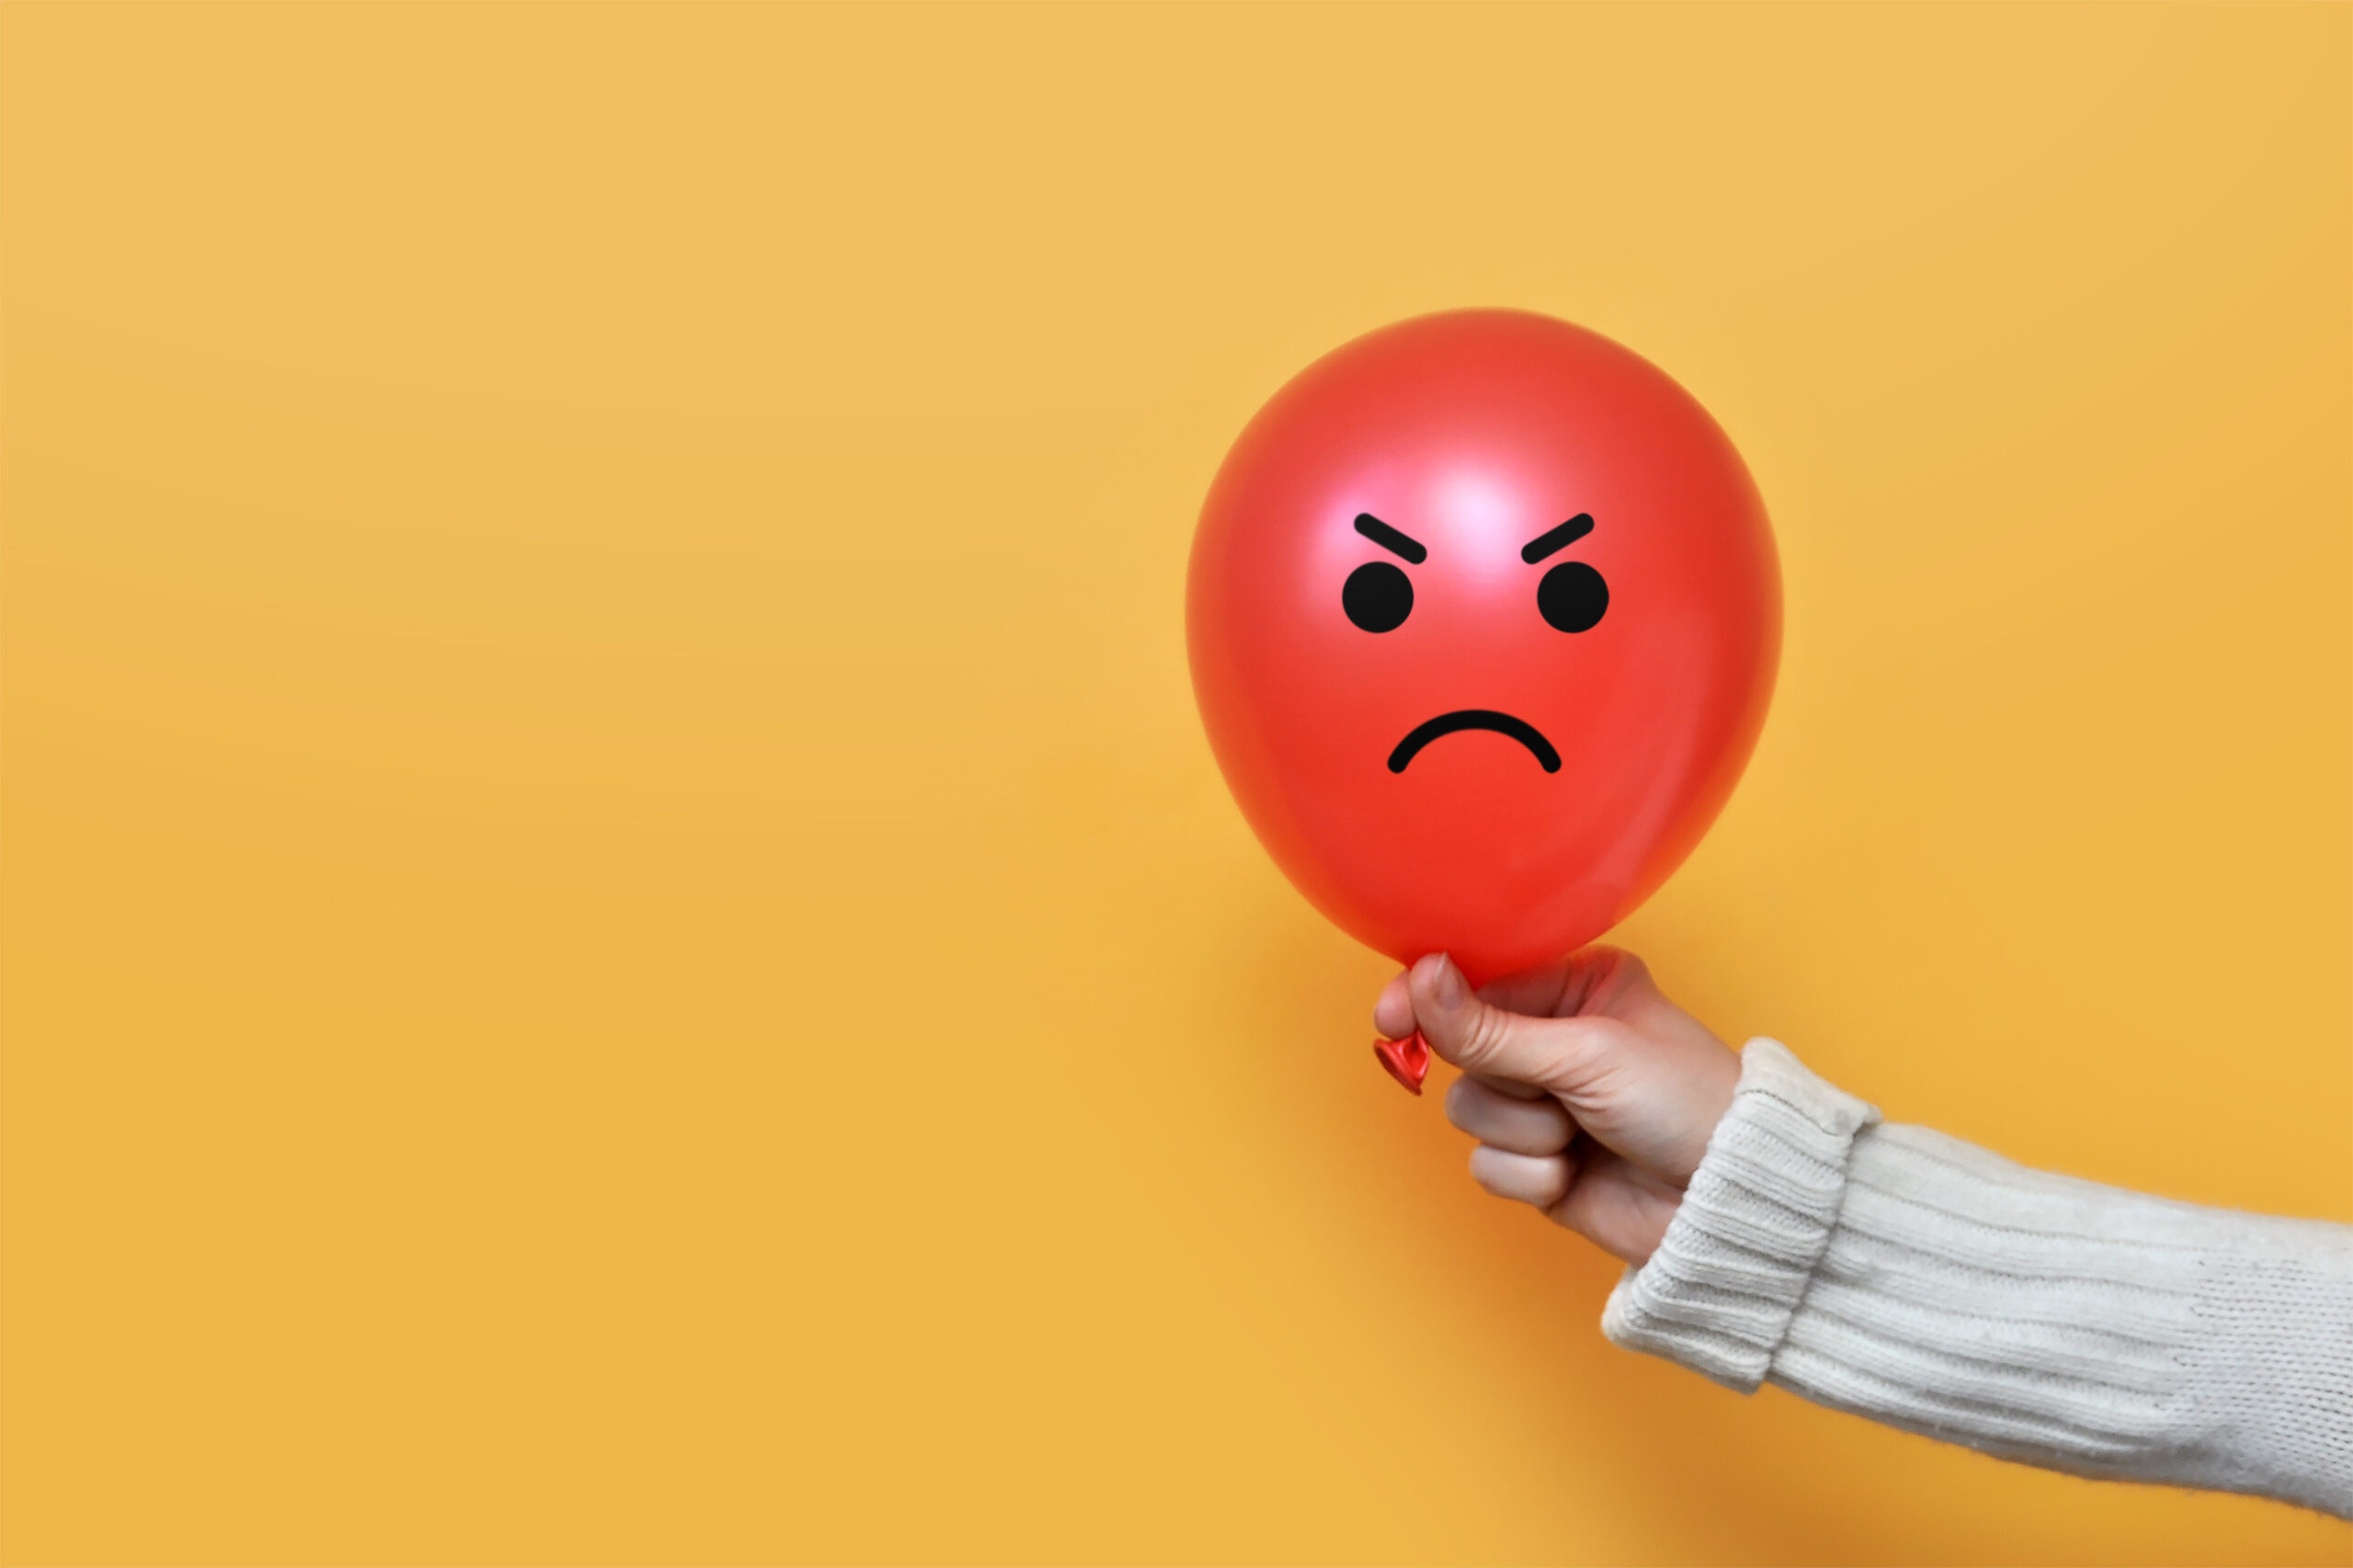 What to do After an Angry Outburst—Photo of a red balloon with an angry face on it held in the hand of a woman with a grey sweater on.